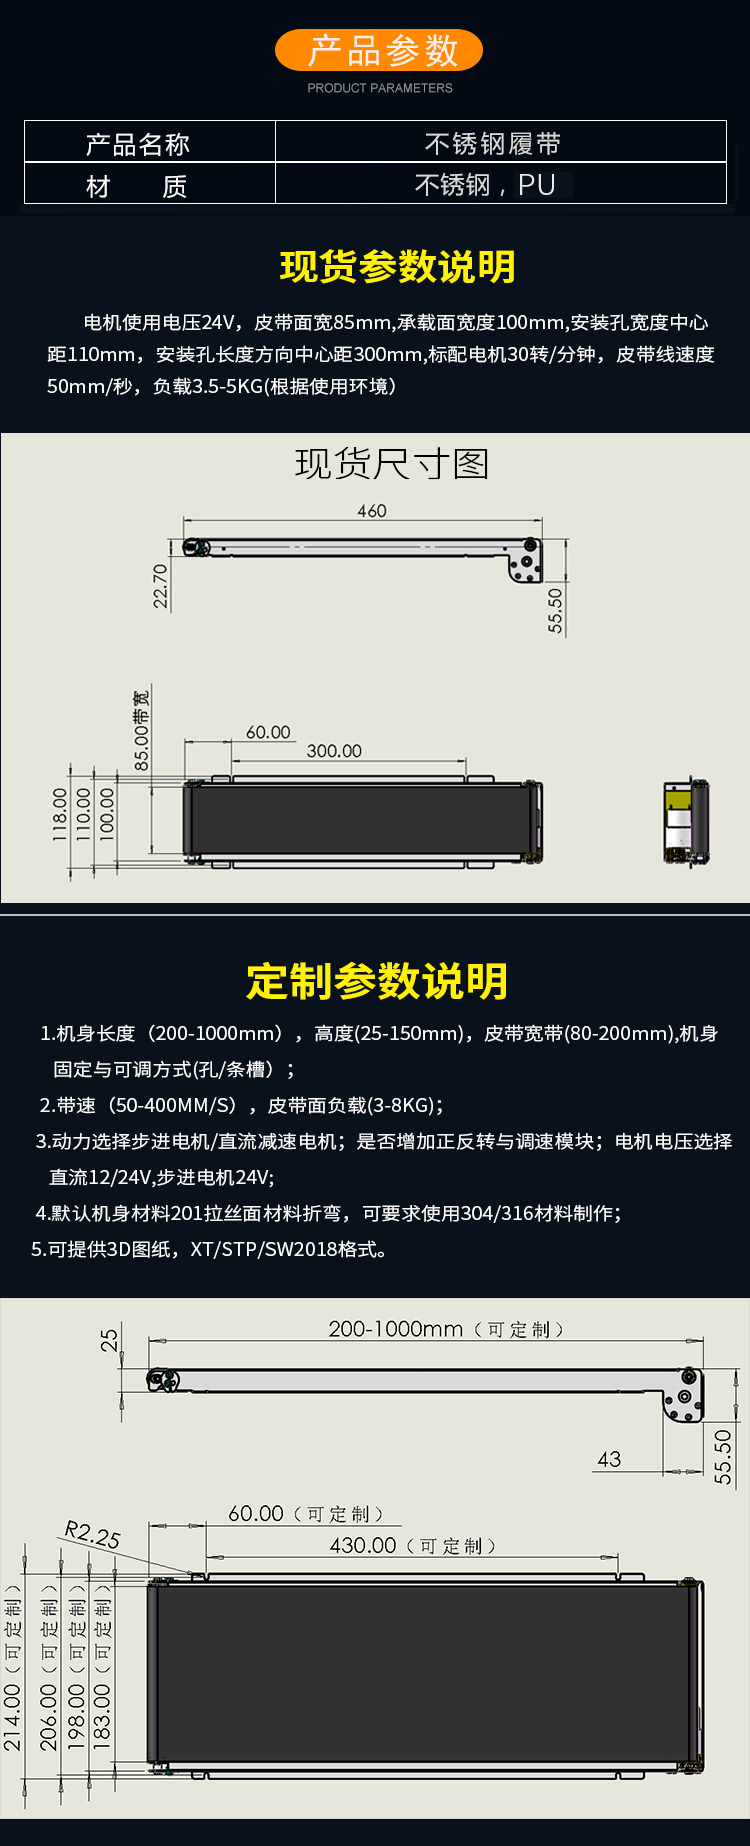 Bench stainless steel vending machine, track cargo track, small and micro automated conveyor belt assembly line customization